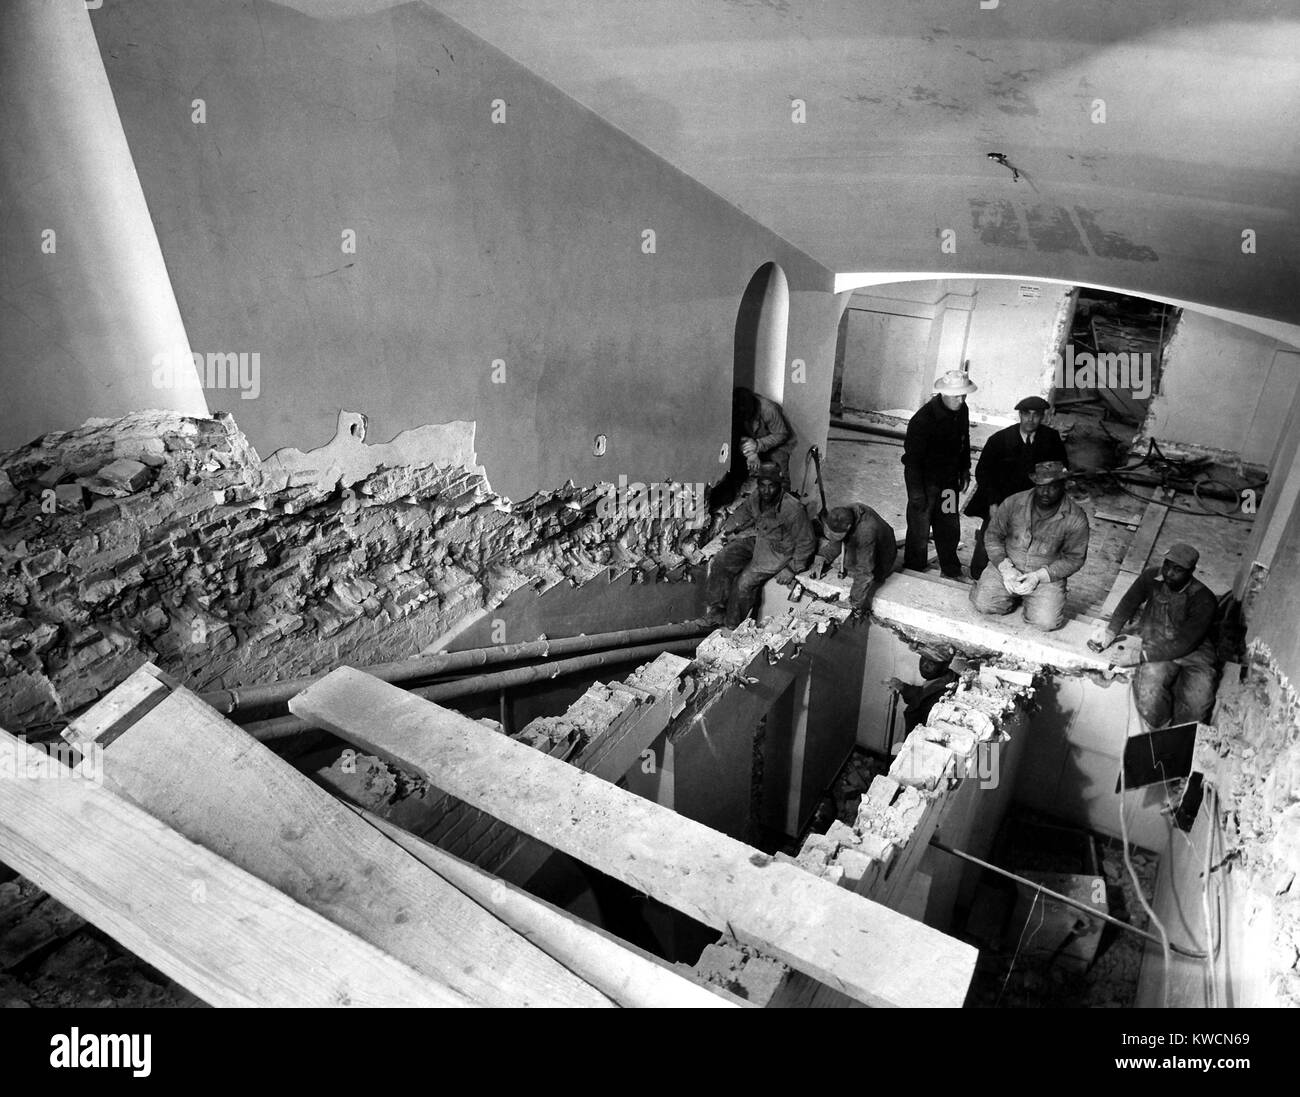 Renovation of the White House during the Truman Administration. Workmen rebuilding the main staircase. Feb. 23, 1950. - (BSLOC_2014_15_119) Stock Photo